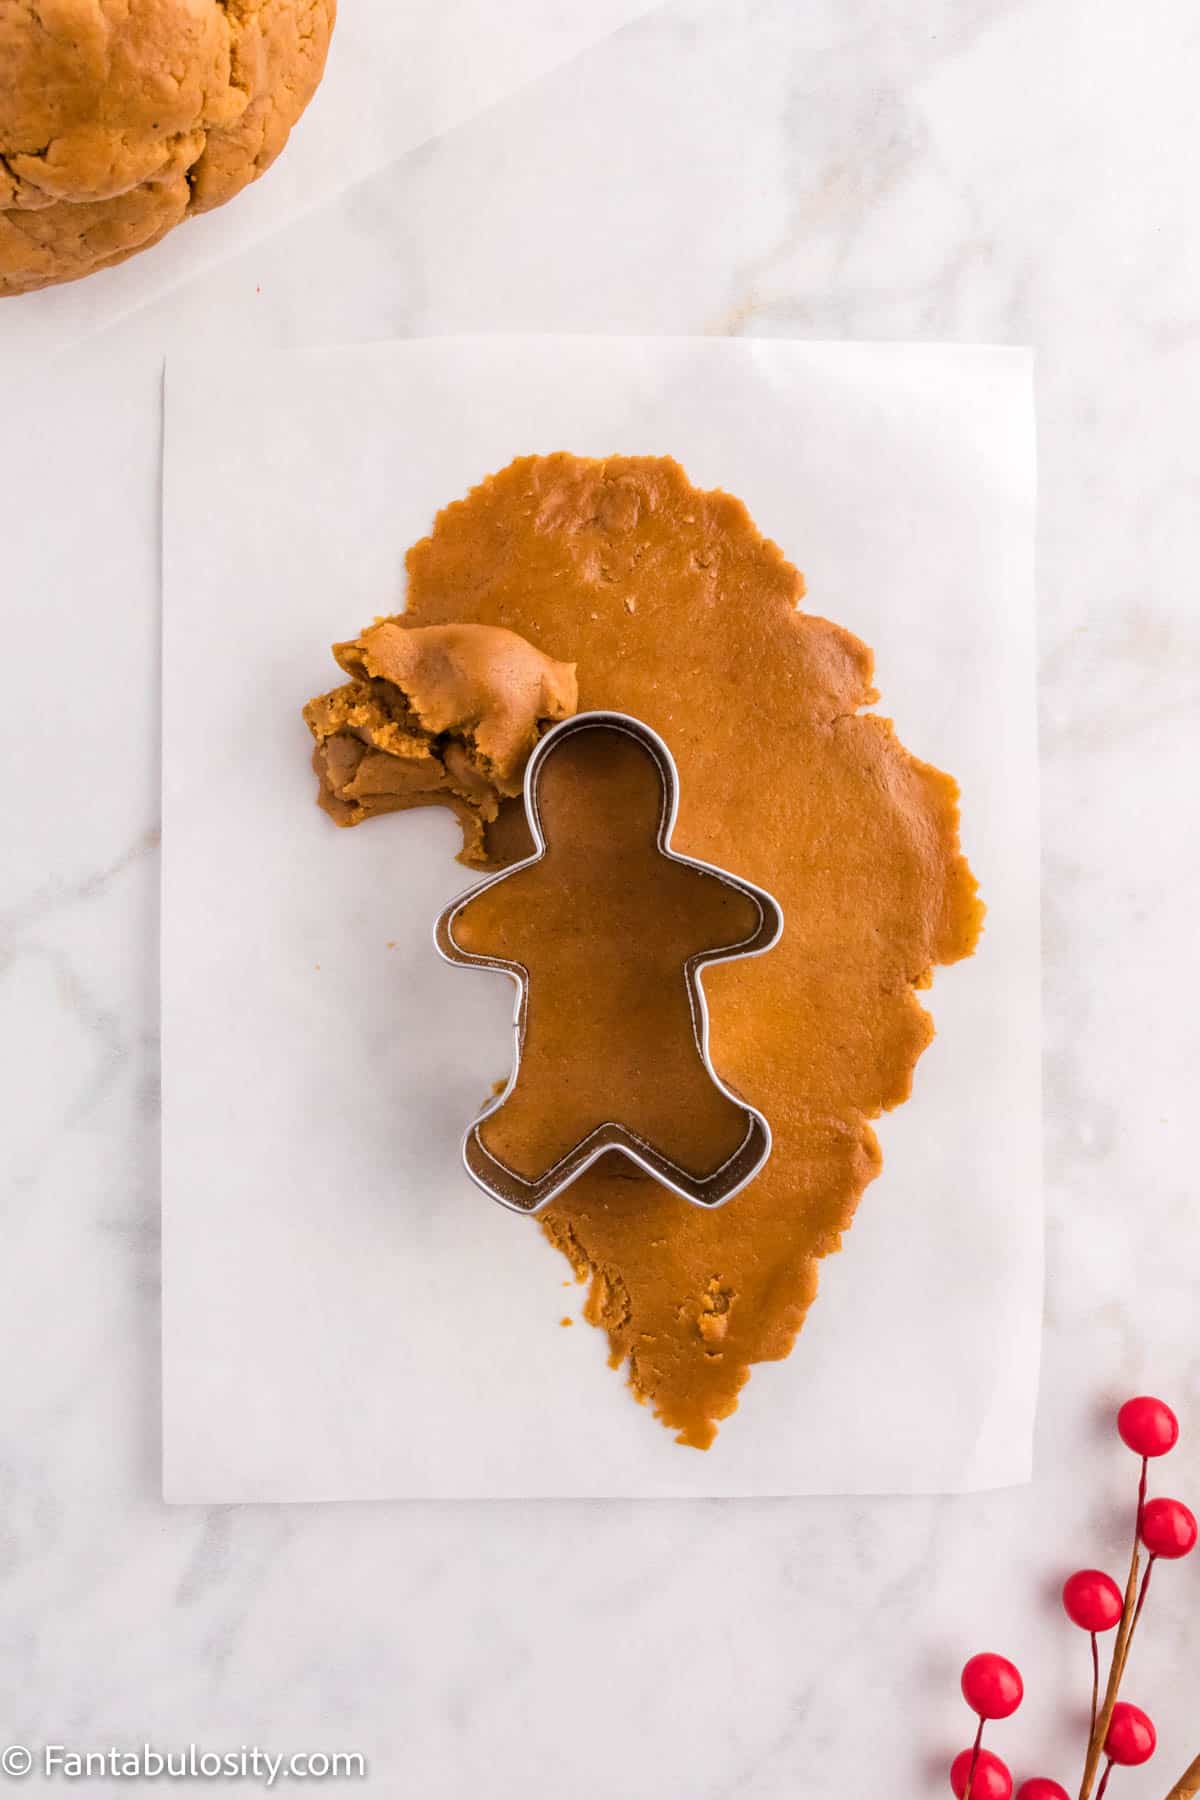 Gingerbread dough is being removed from around a cookie cutter to reveal the shape made from a cookie cutter